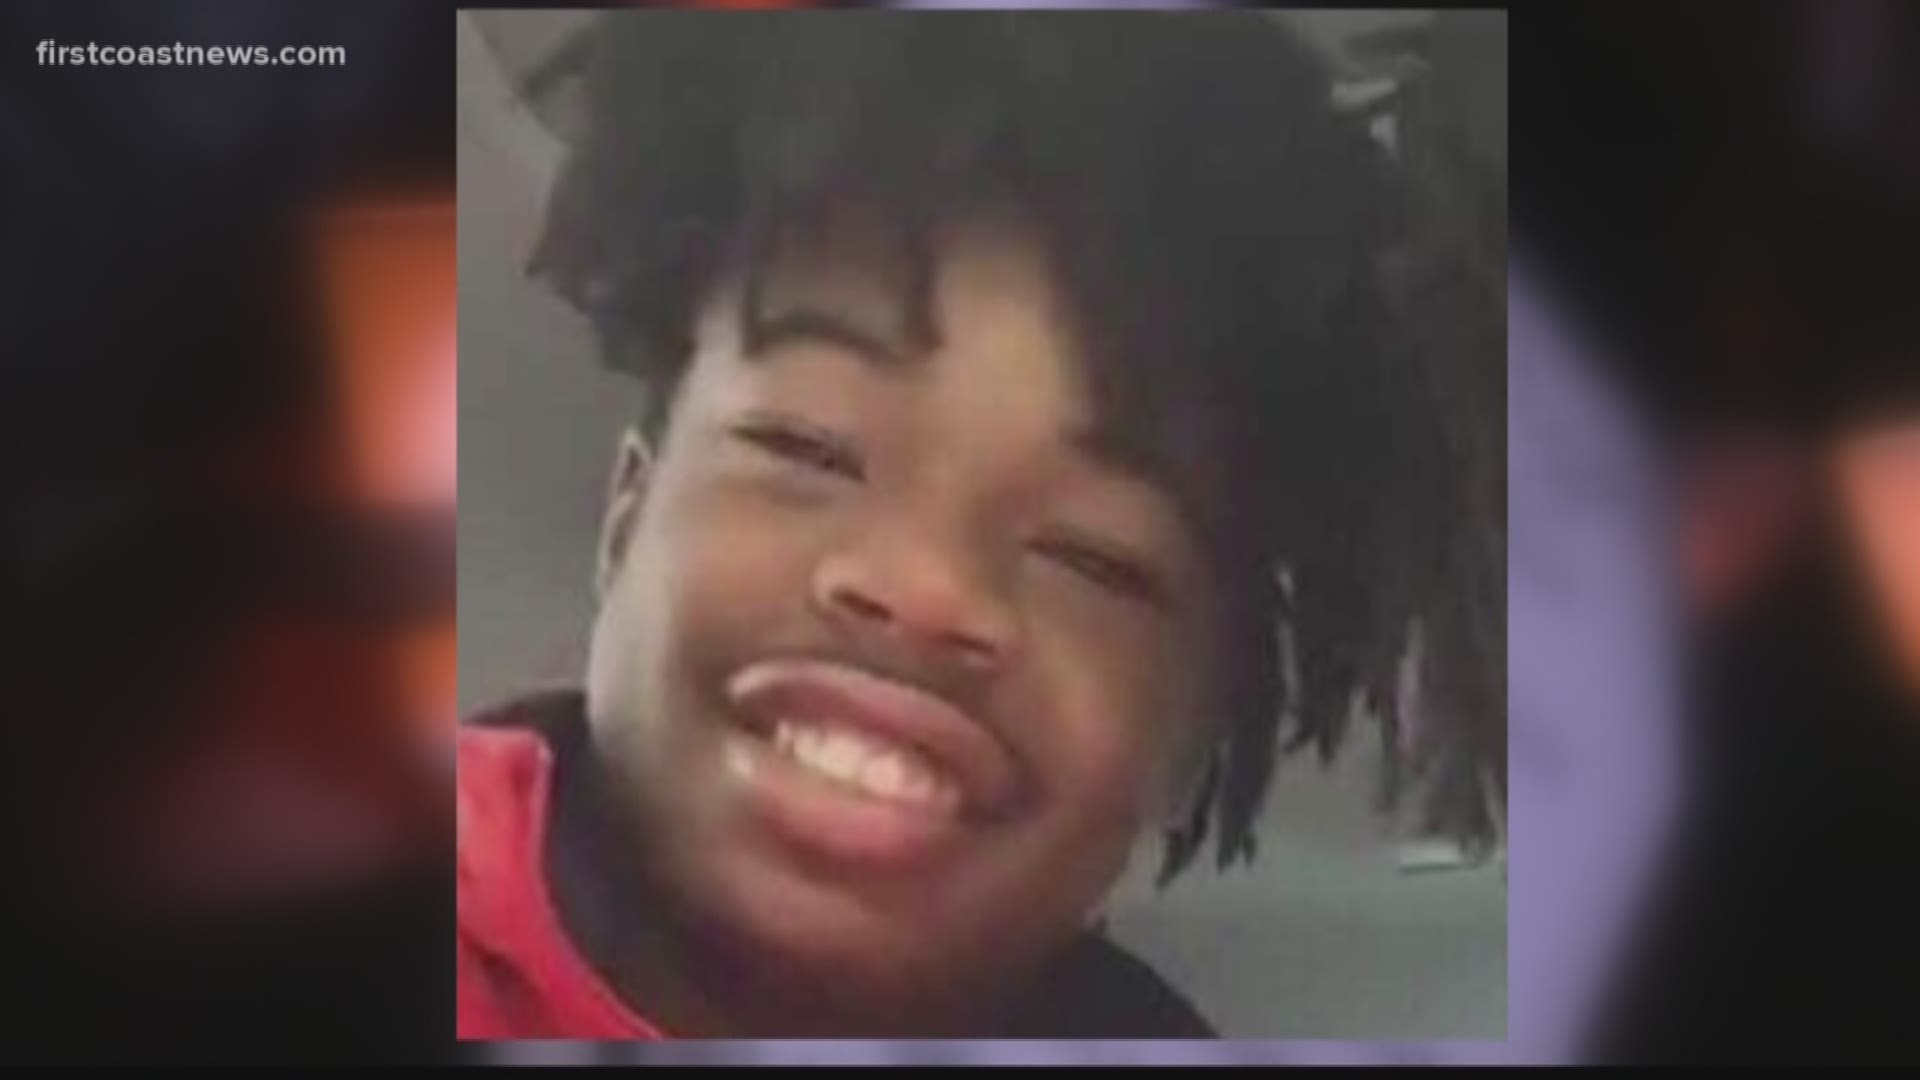 A candlelight vigil was held for Kwamae Jones, 17, who was shot and killed by a Jacksonville Sheriff's Office, police say.